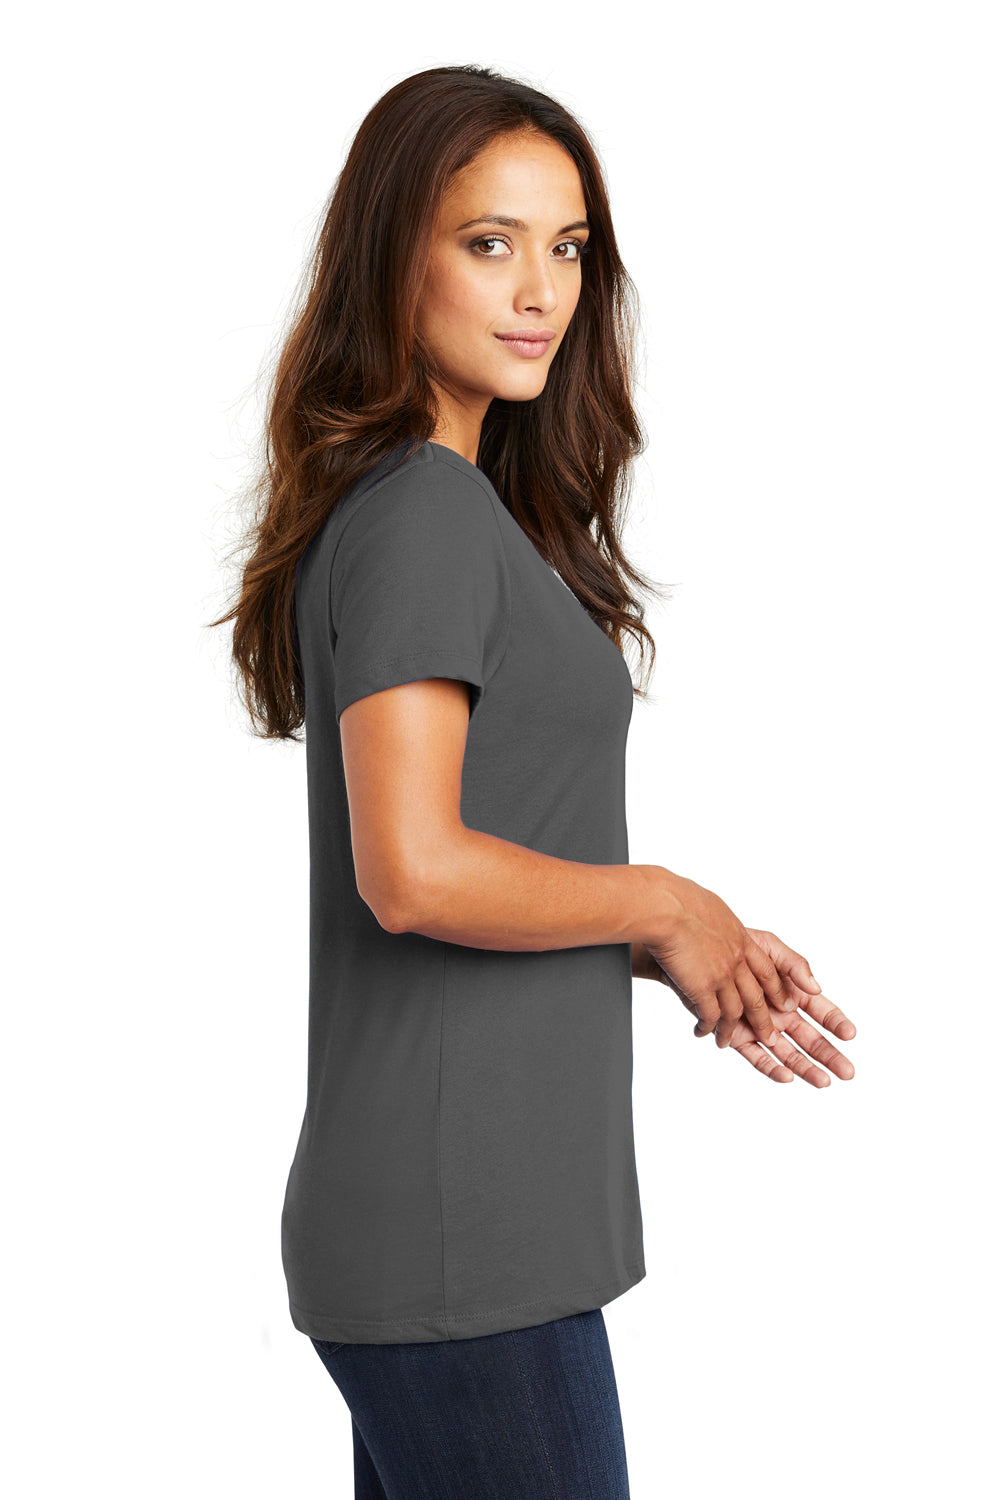 District DM1170L Womens Perfect Weight Short Sleeve V-Neck T-Shirt Charcoal Grey Side